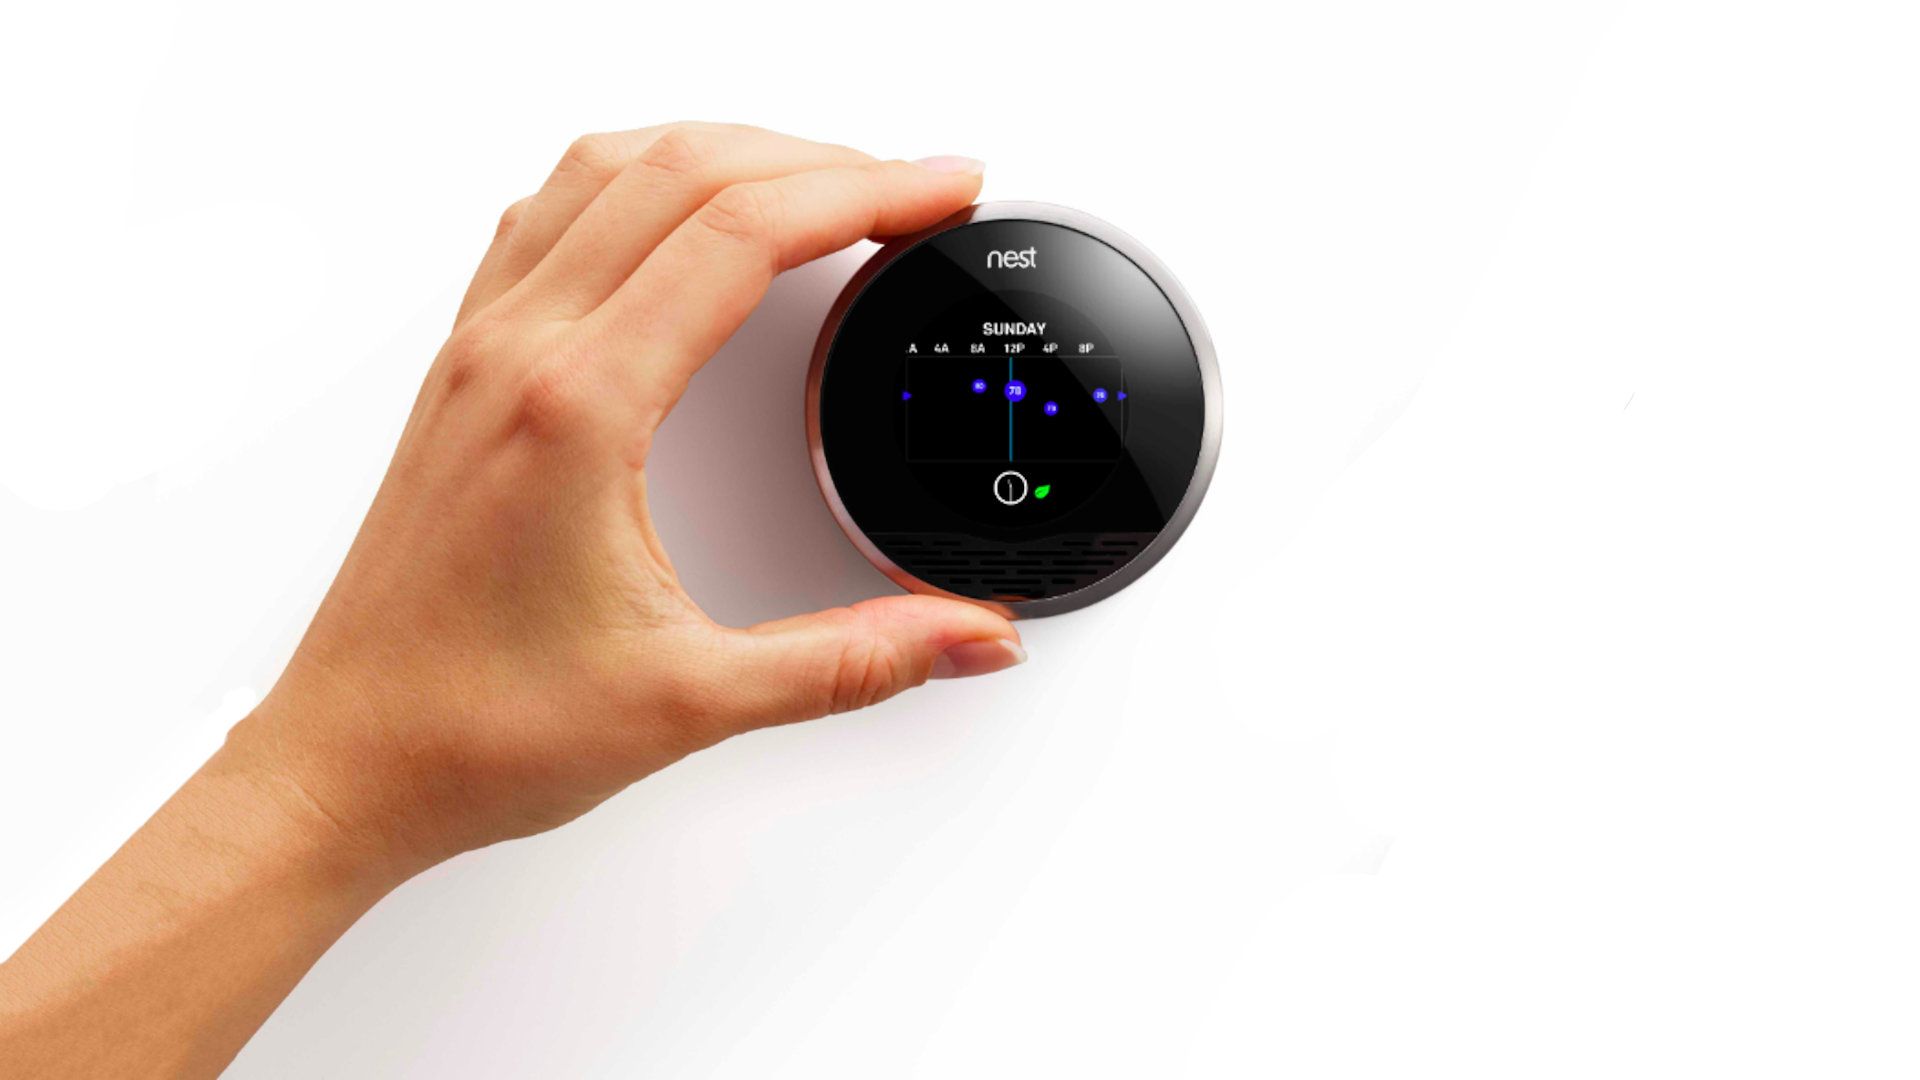 Older Nest Learning Thermostats had small screens.